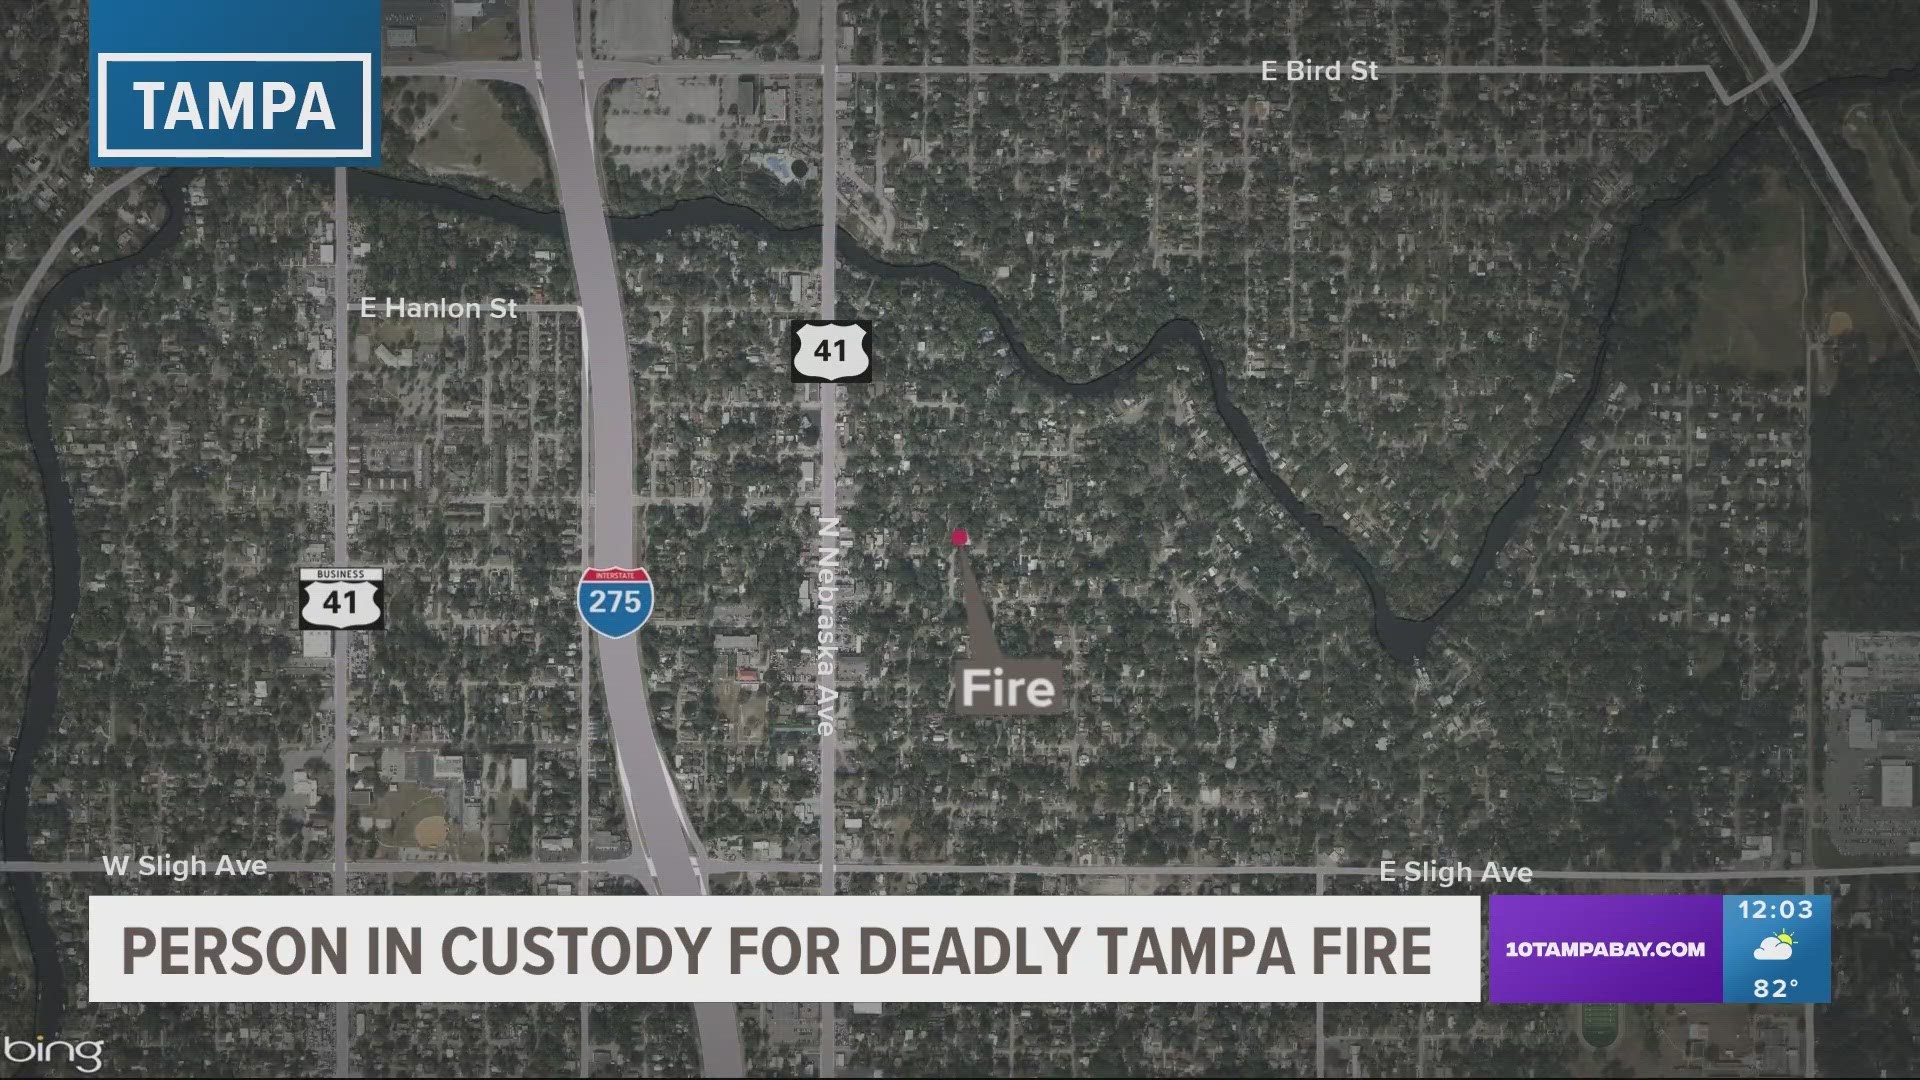 Investigators say the fire that caused one person's death was actually targeted.